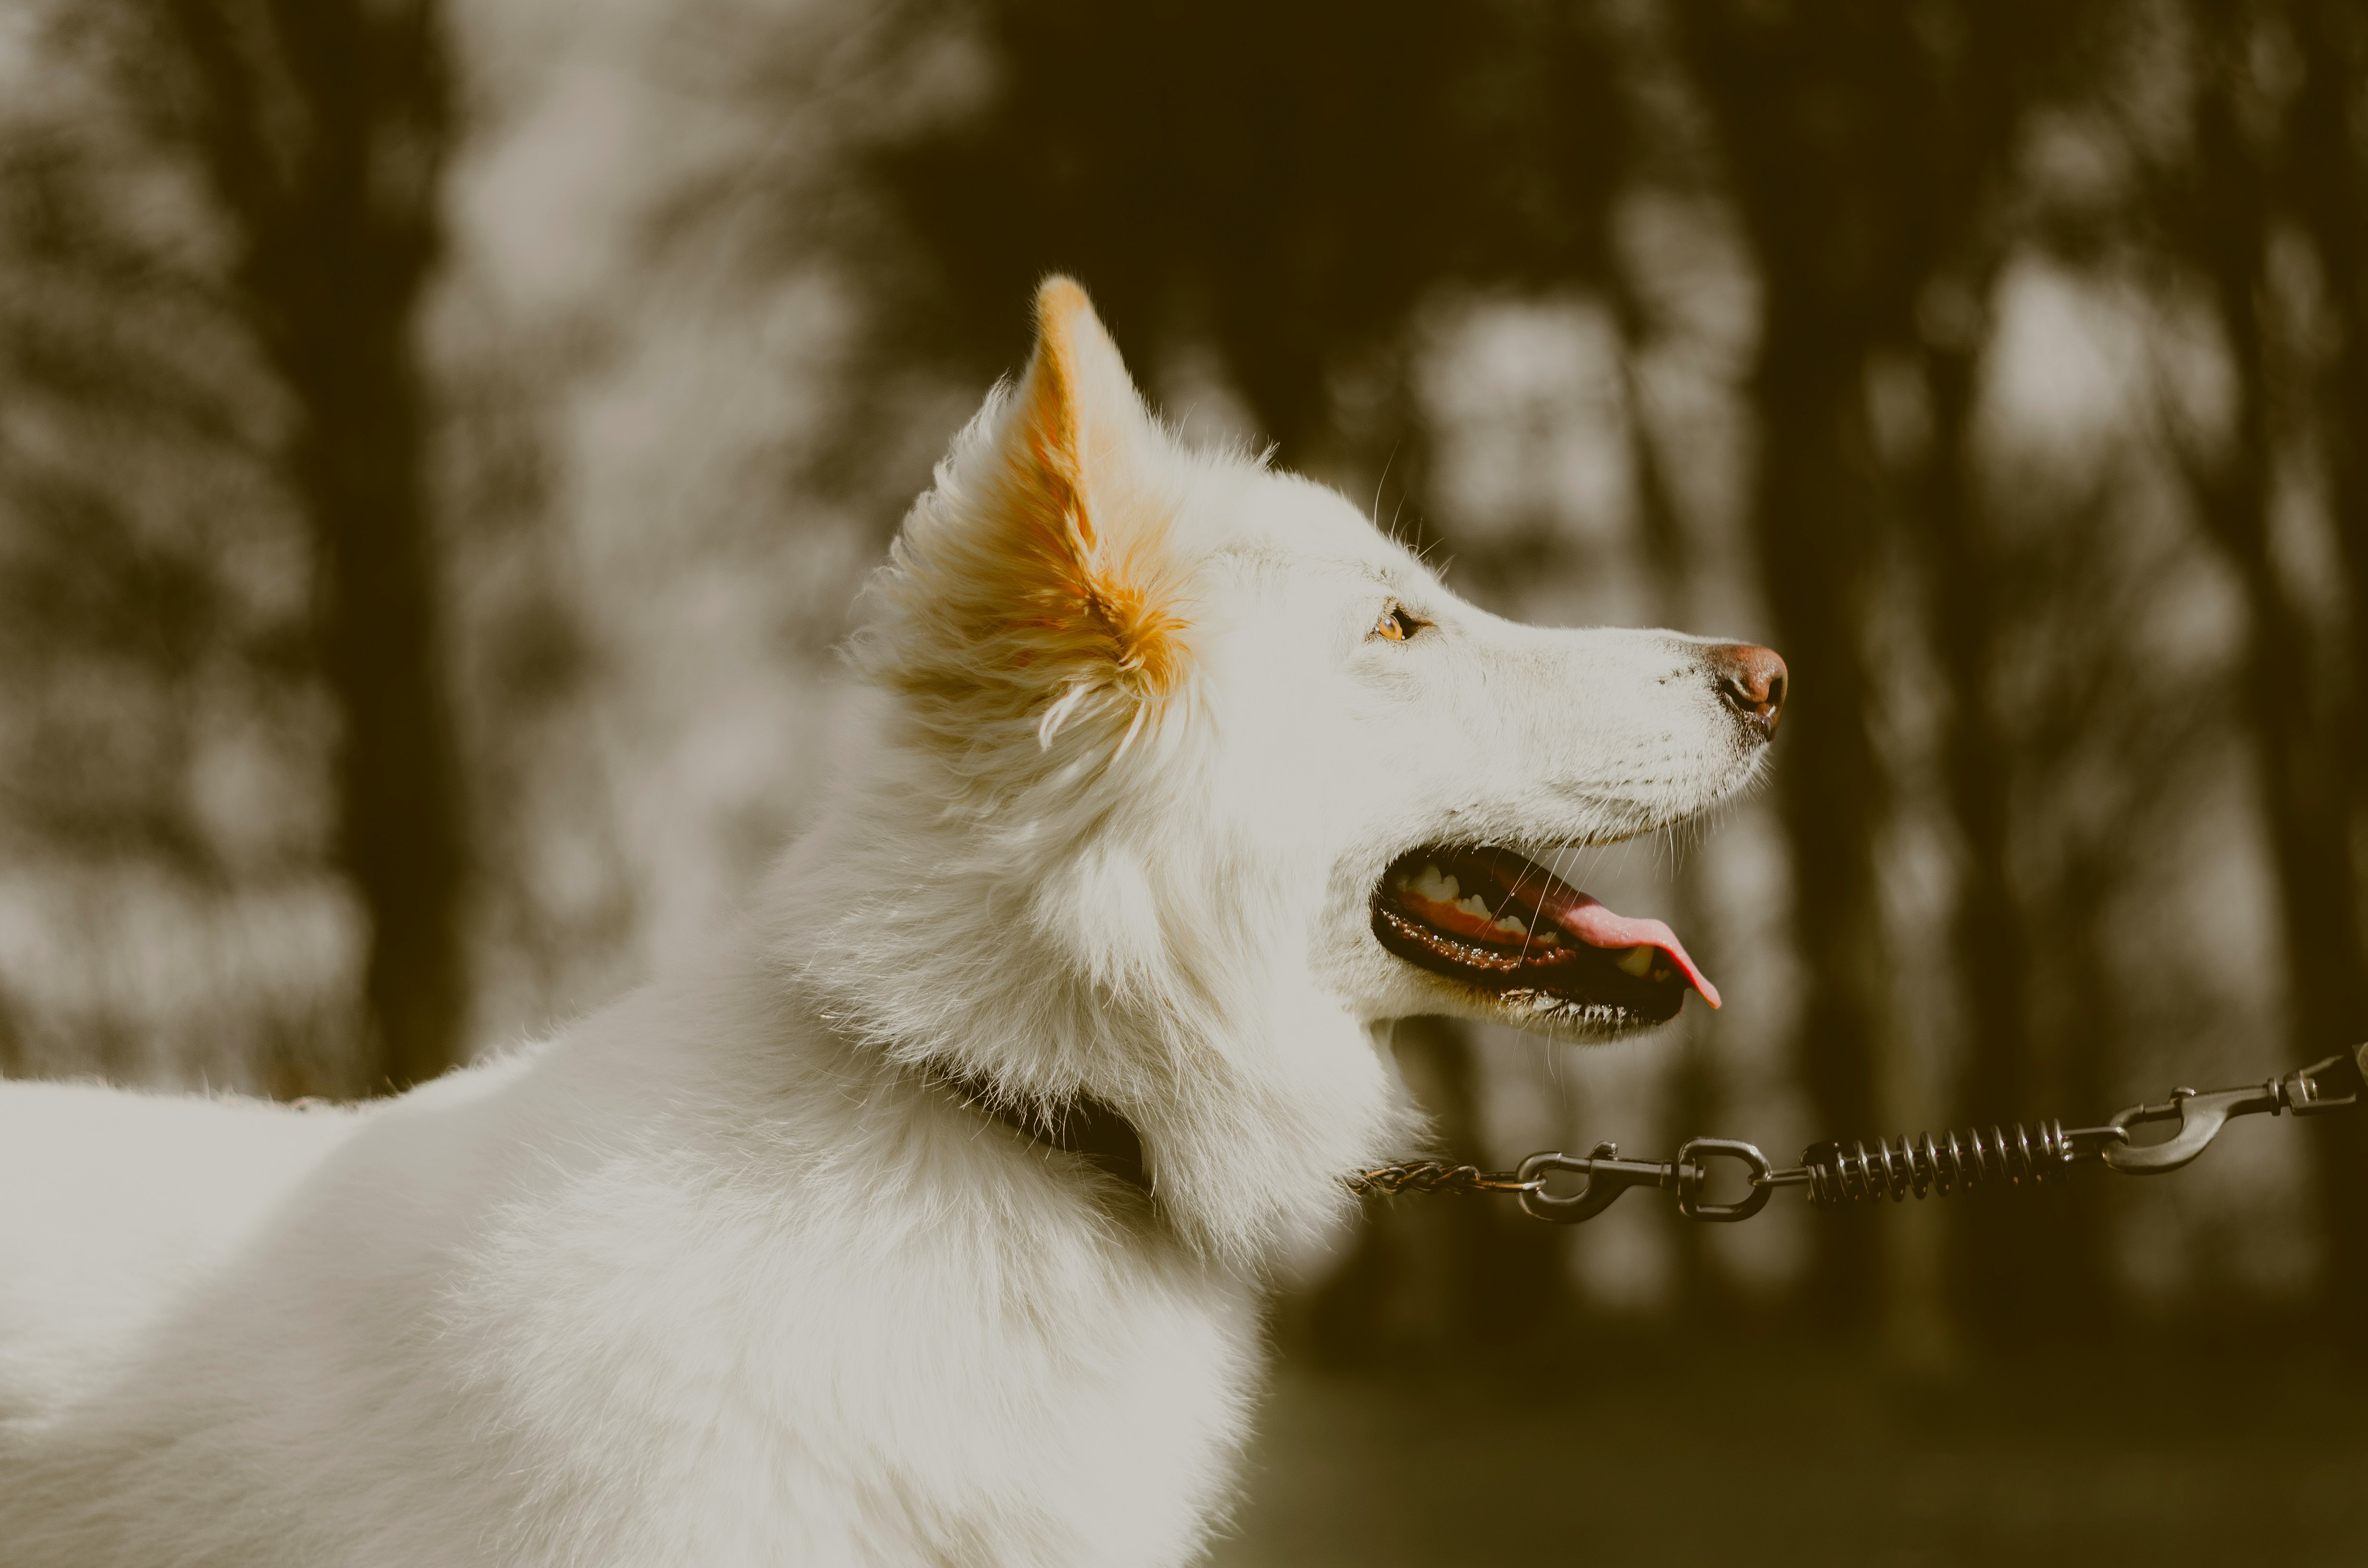 shallow focus photography of white dog